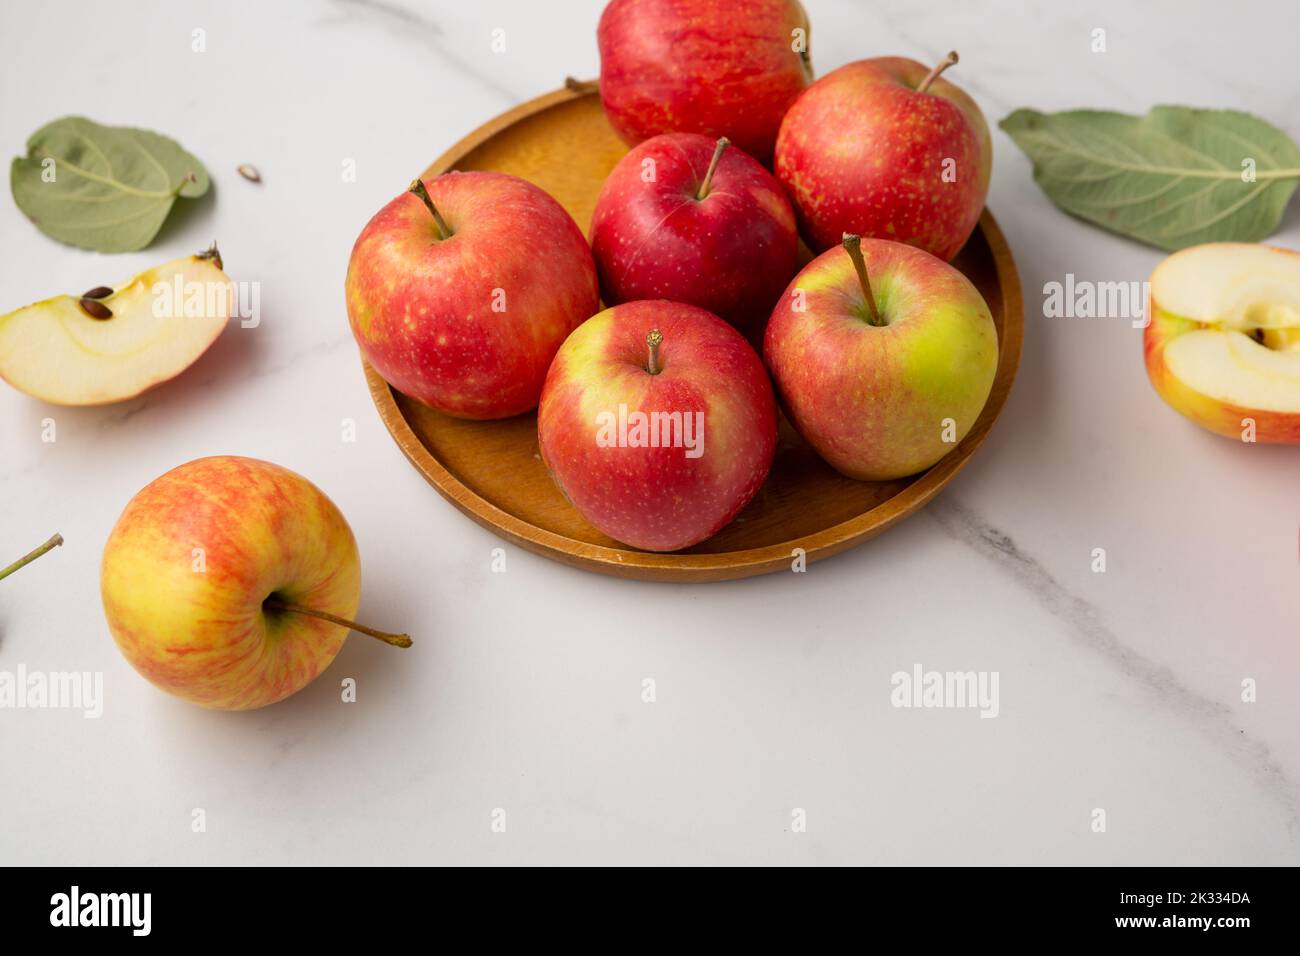 Close up of red yellow apples on wooden plate fruits food Stock Photo